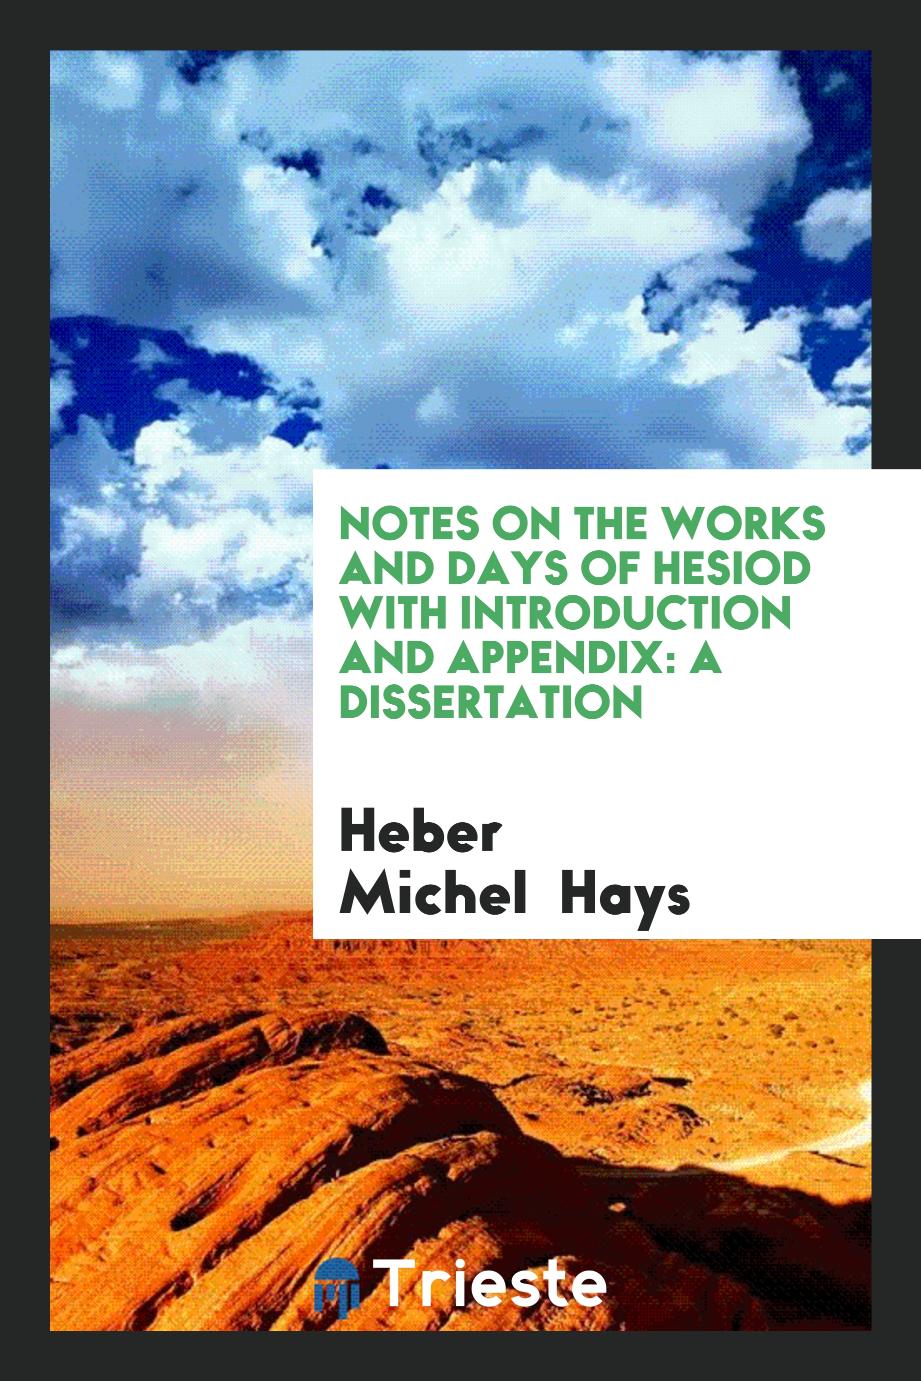 Notes on the Works and Days of Hesiod with Introduction and Appendix: A Dissertation